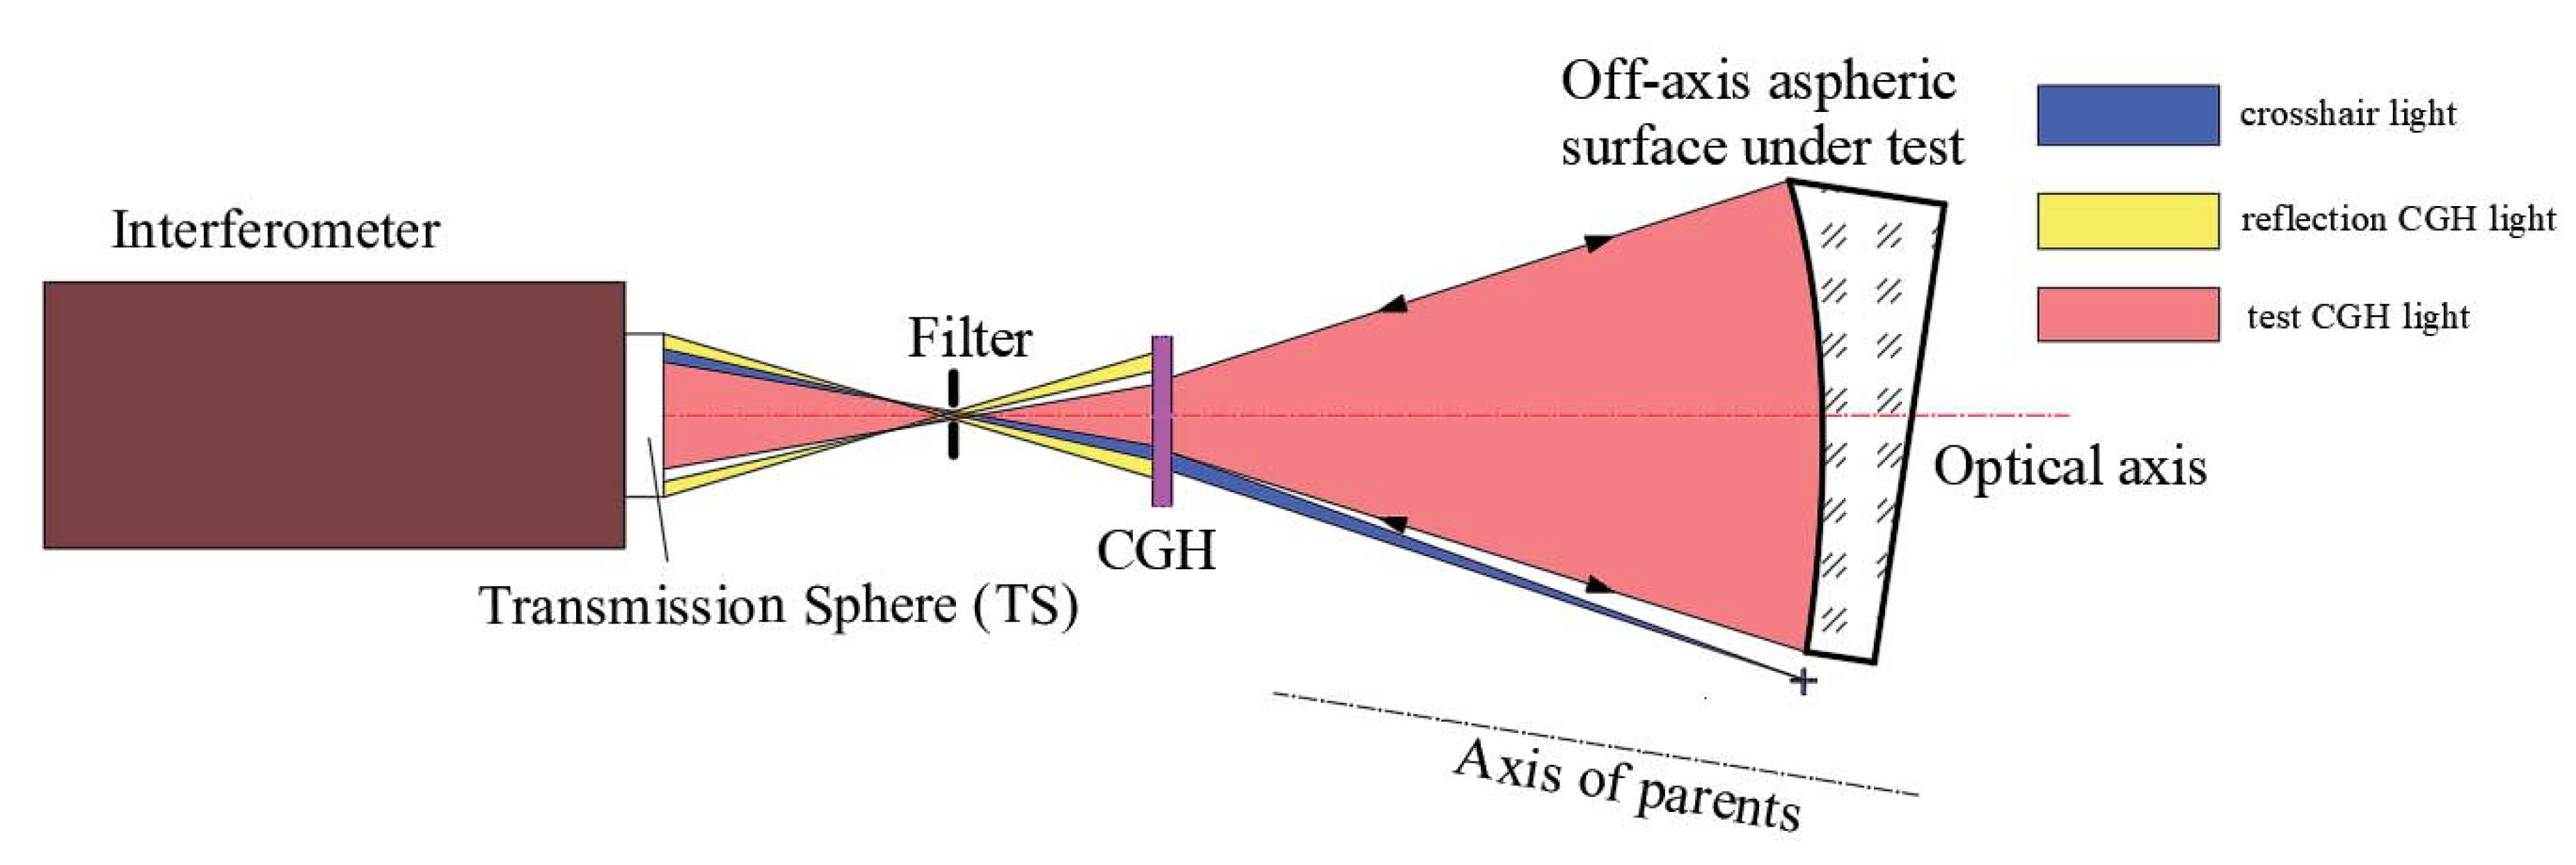 Materials | Free Full-Text | The Methods and Experiments of Shape  Measurement for Off-Axis Conic Aspheric Surface